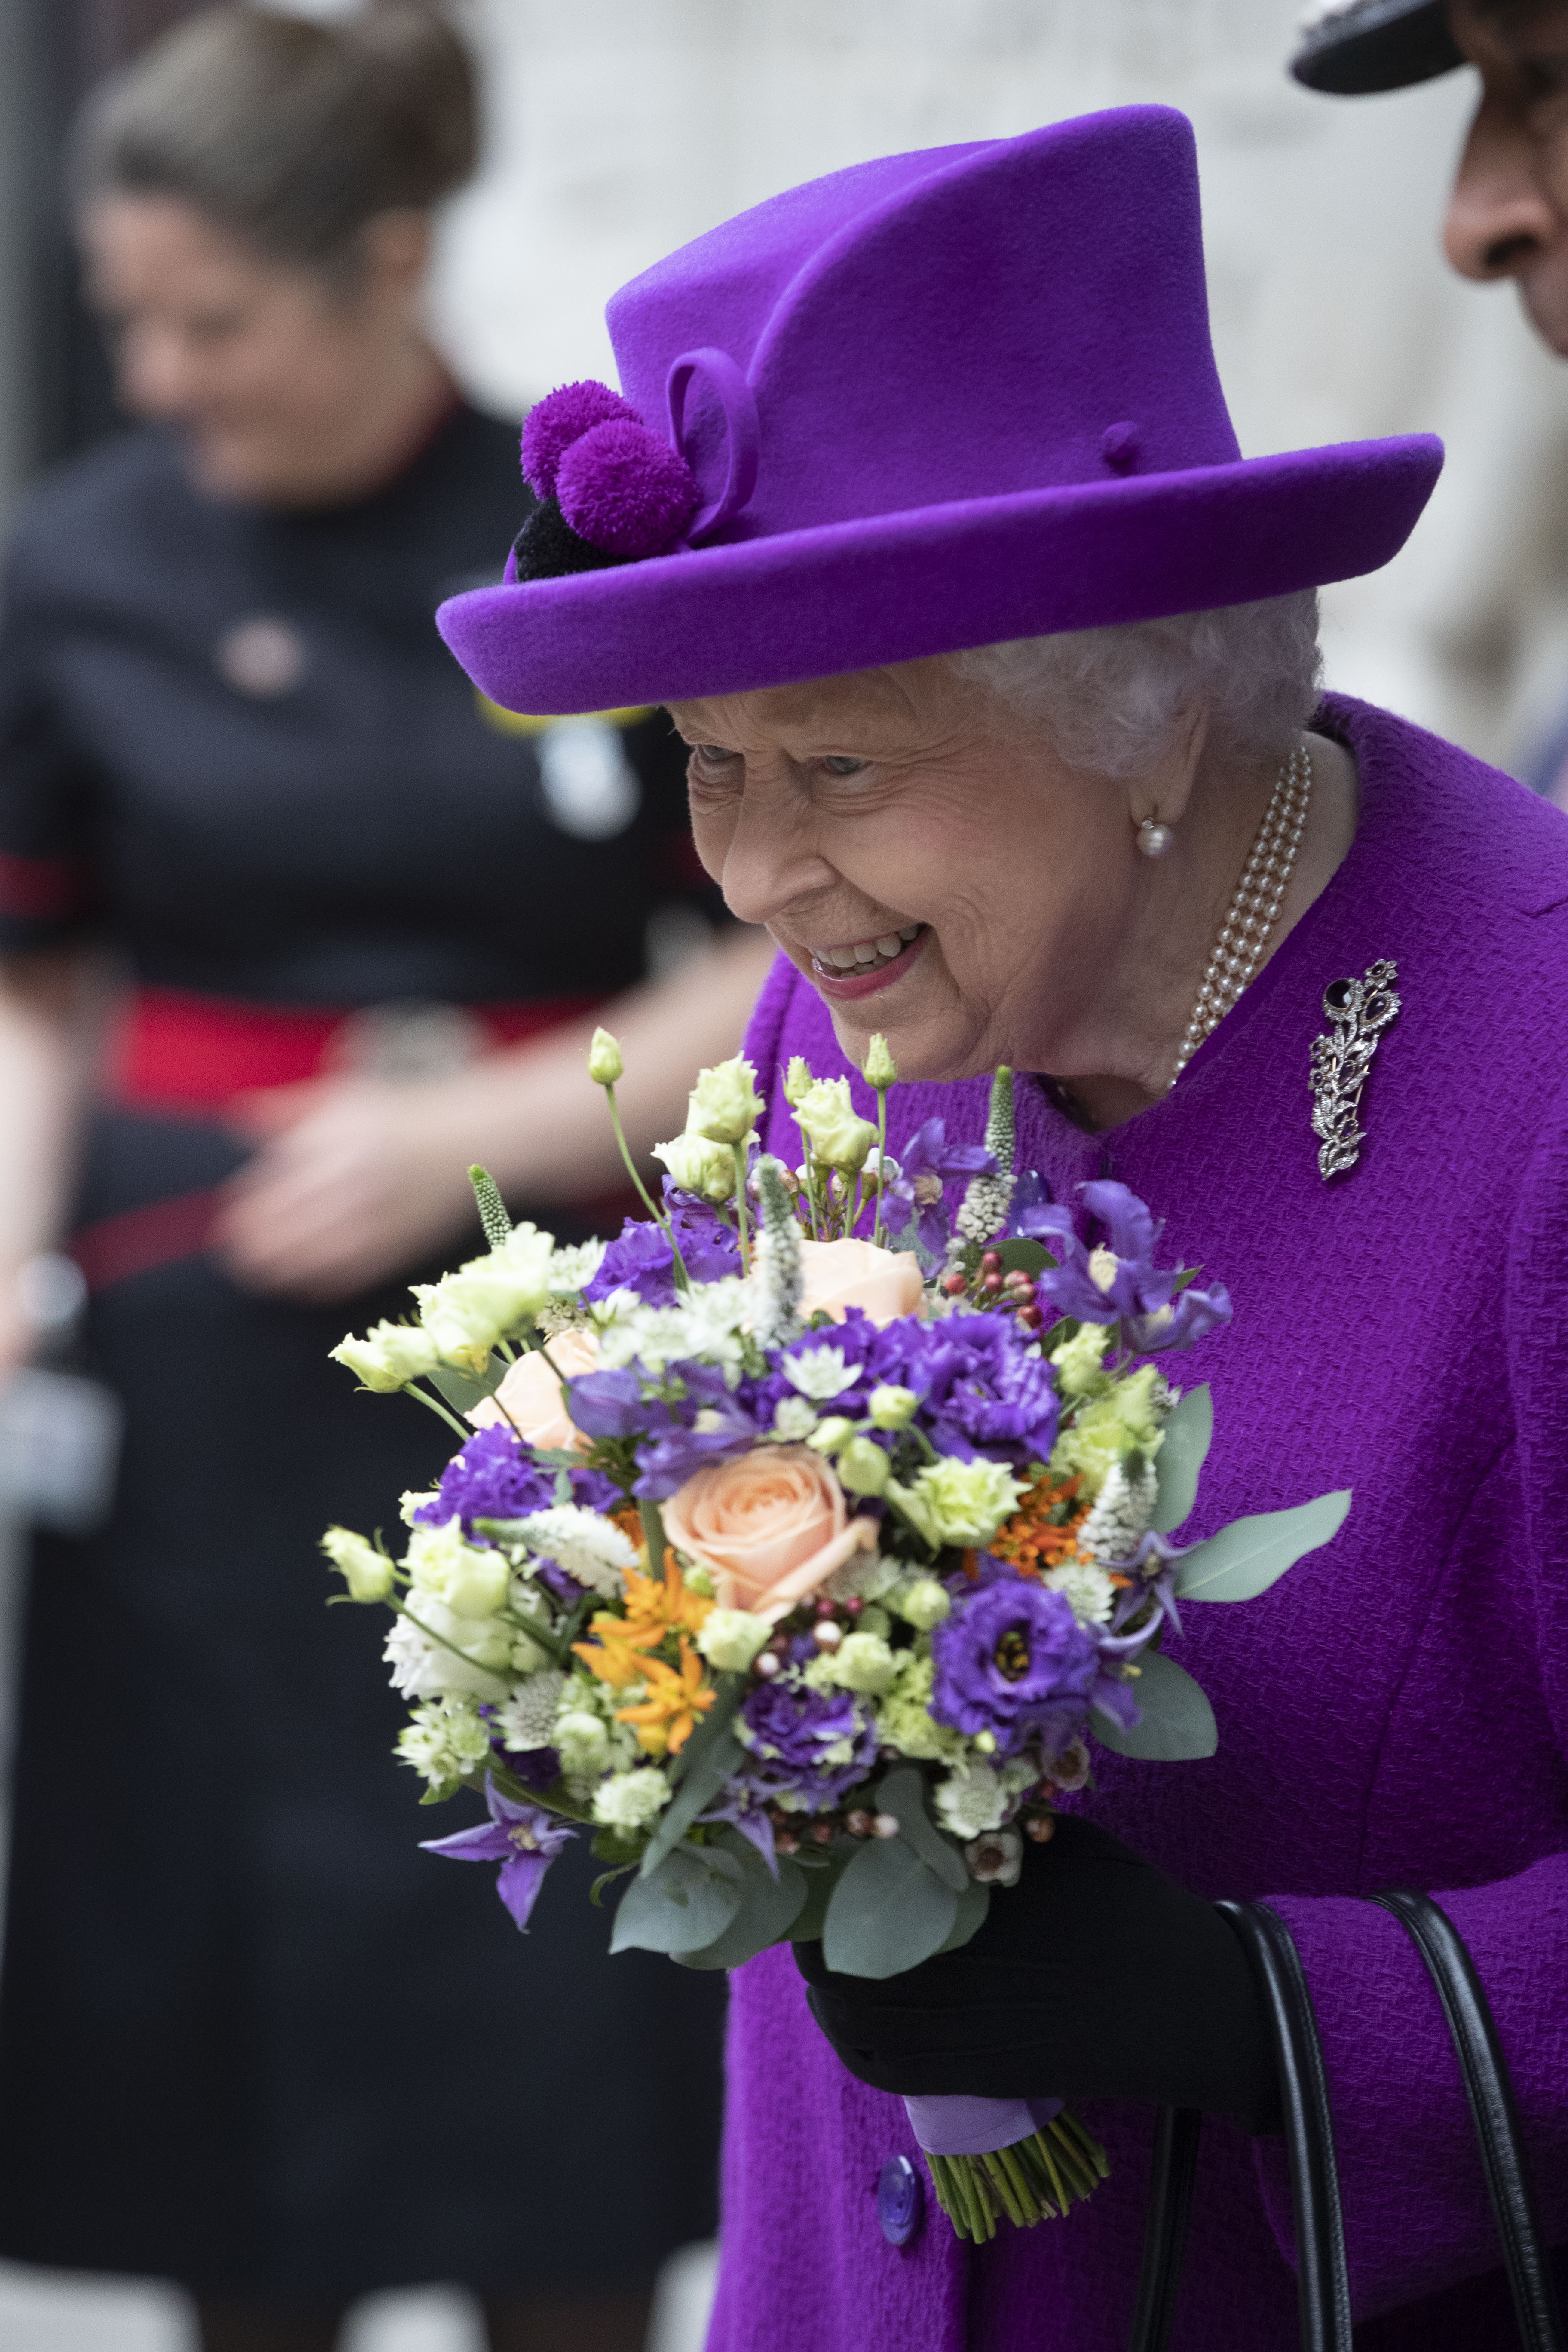 The Queen opens a new UCLH facility 